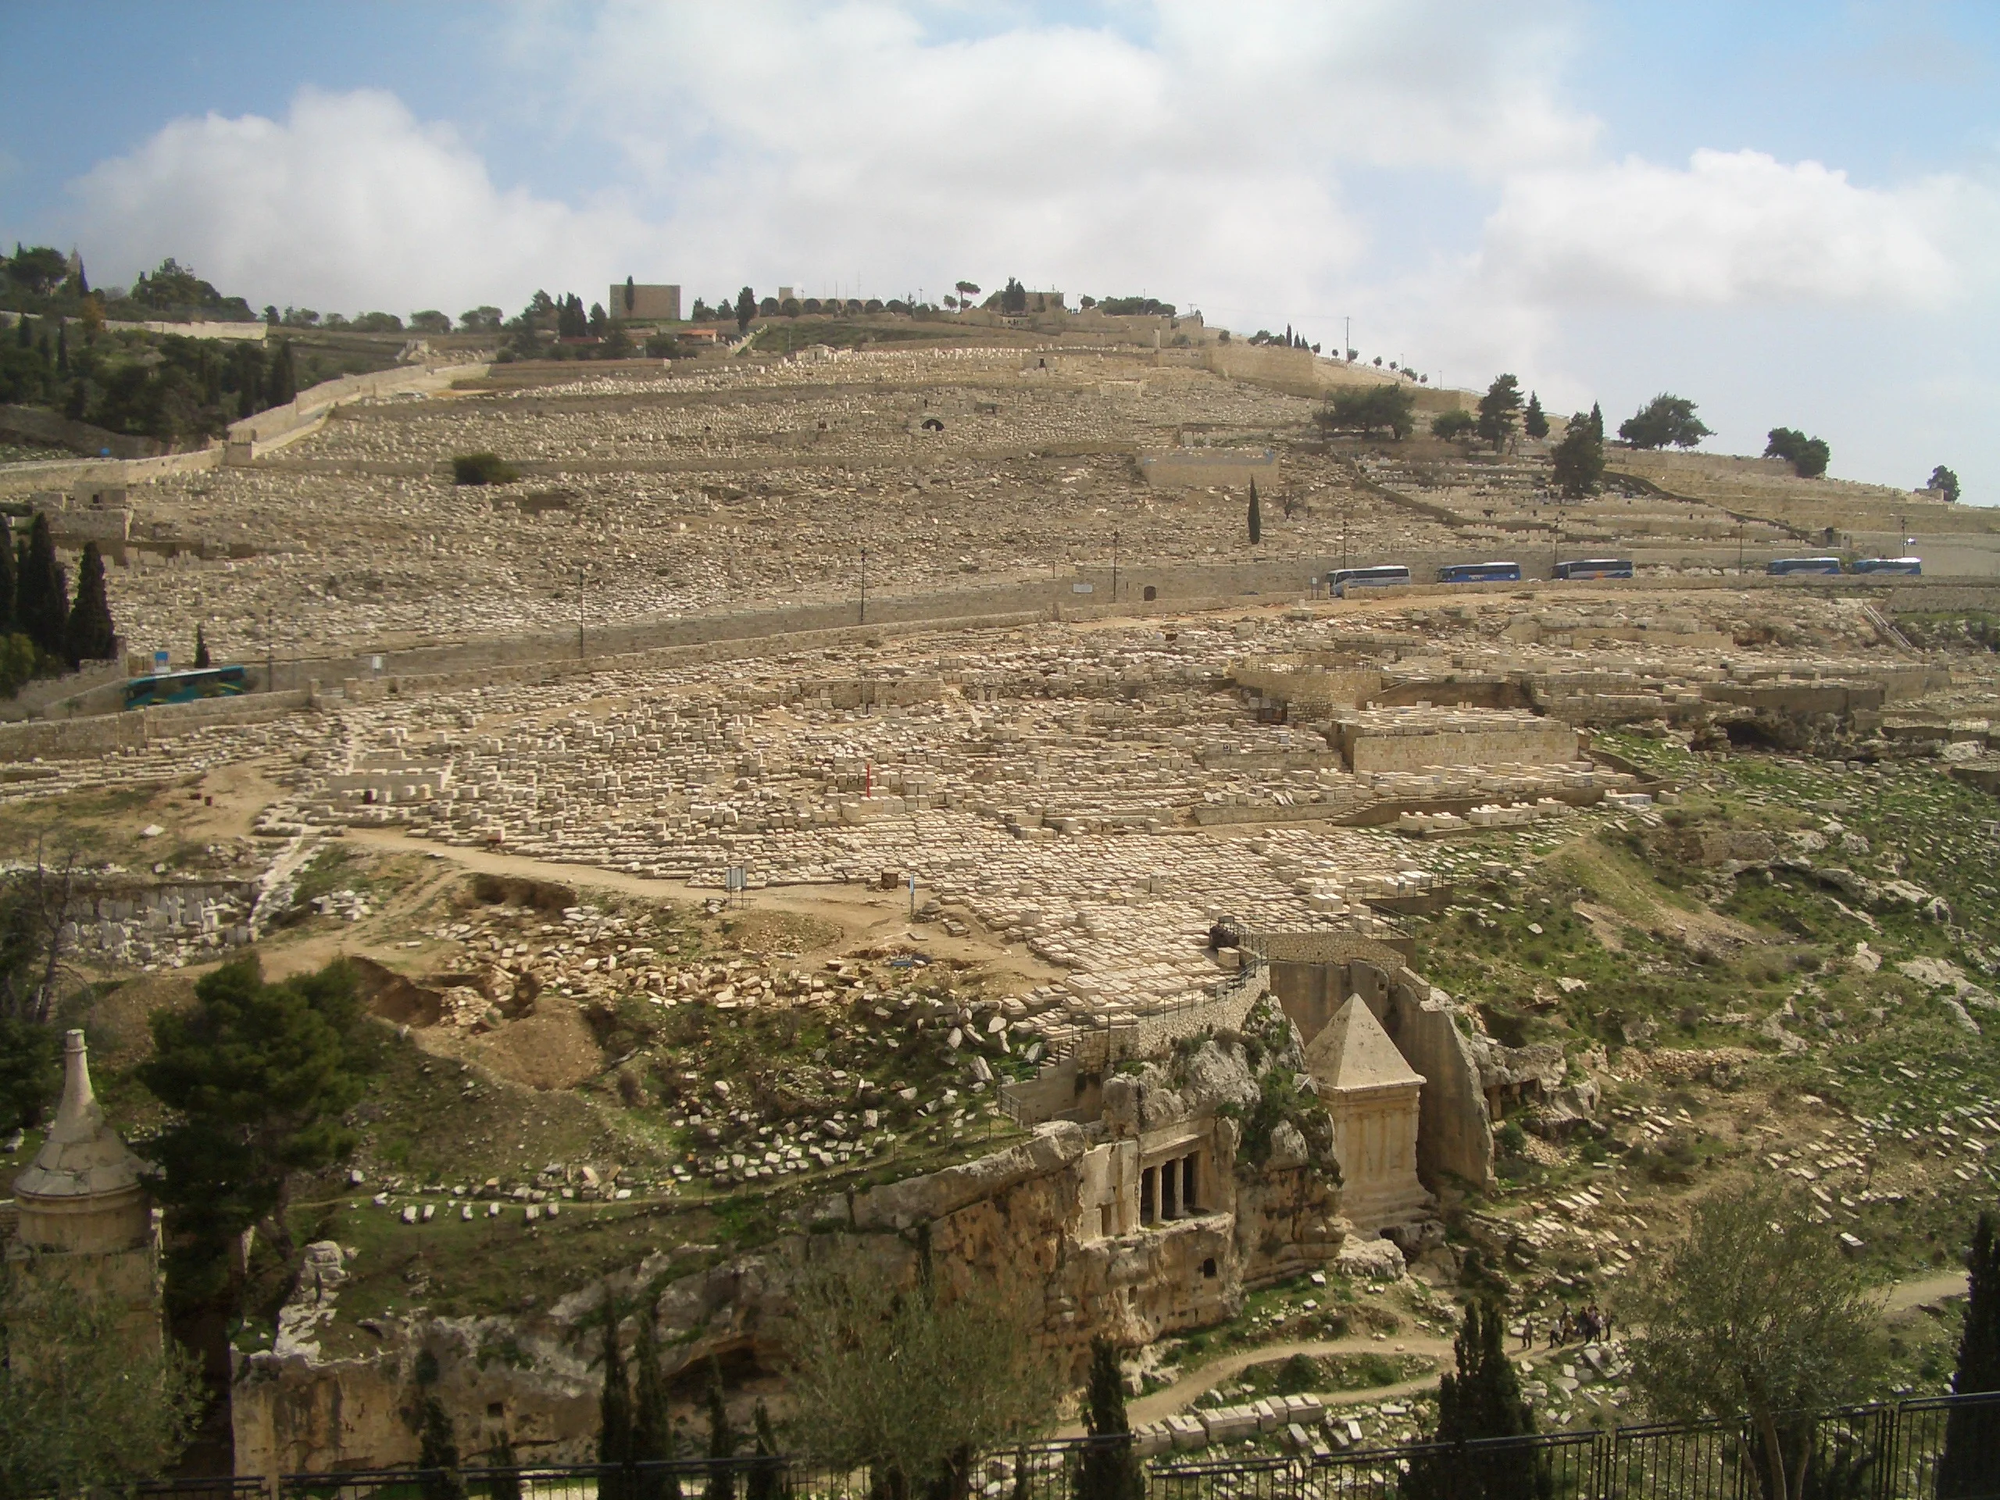 A tour of The Mount of Olives